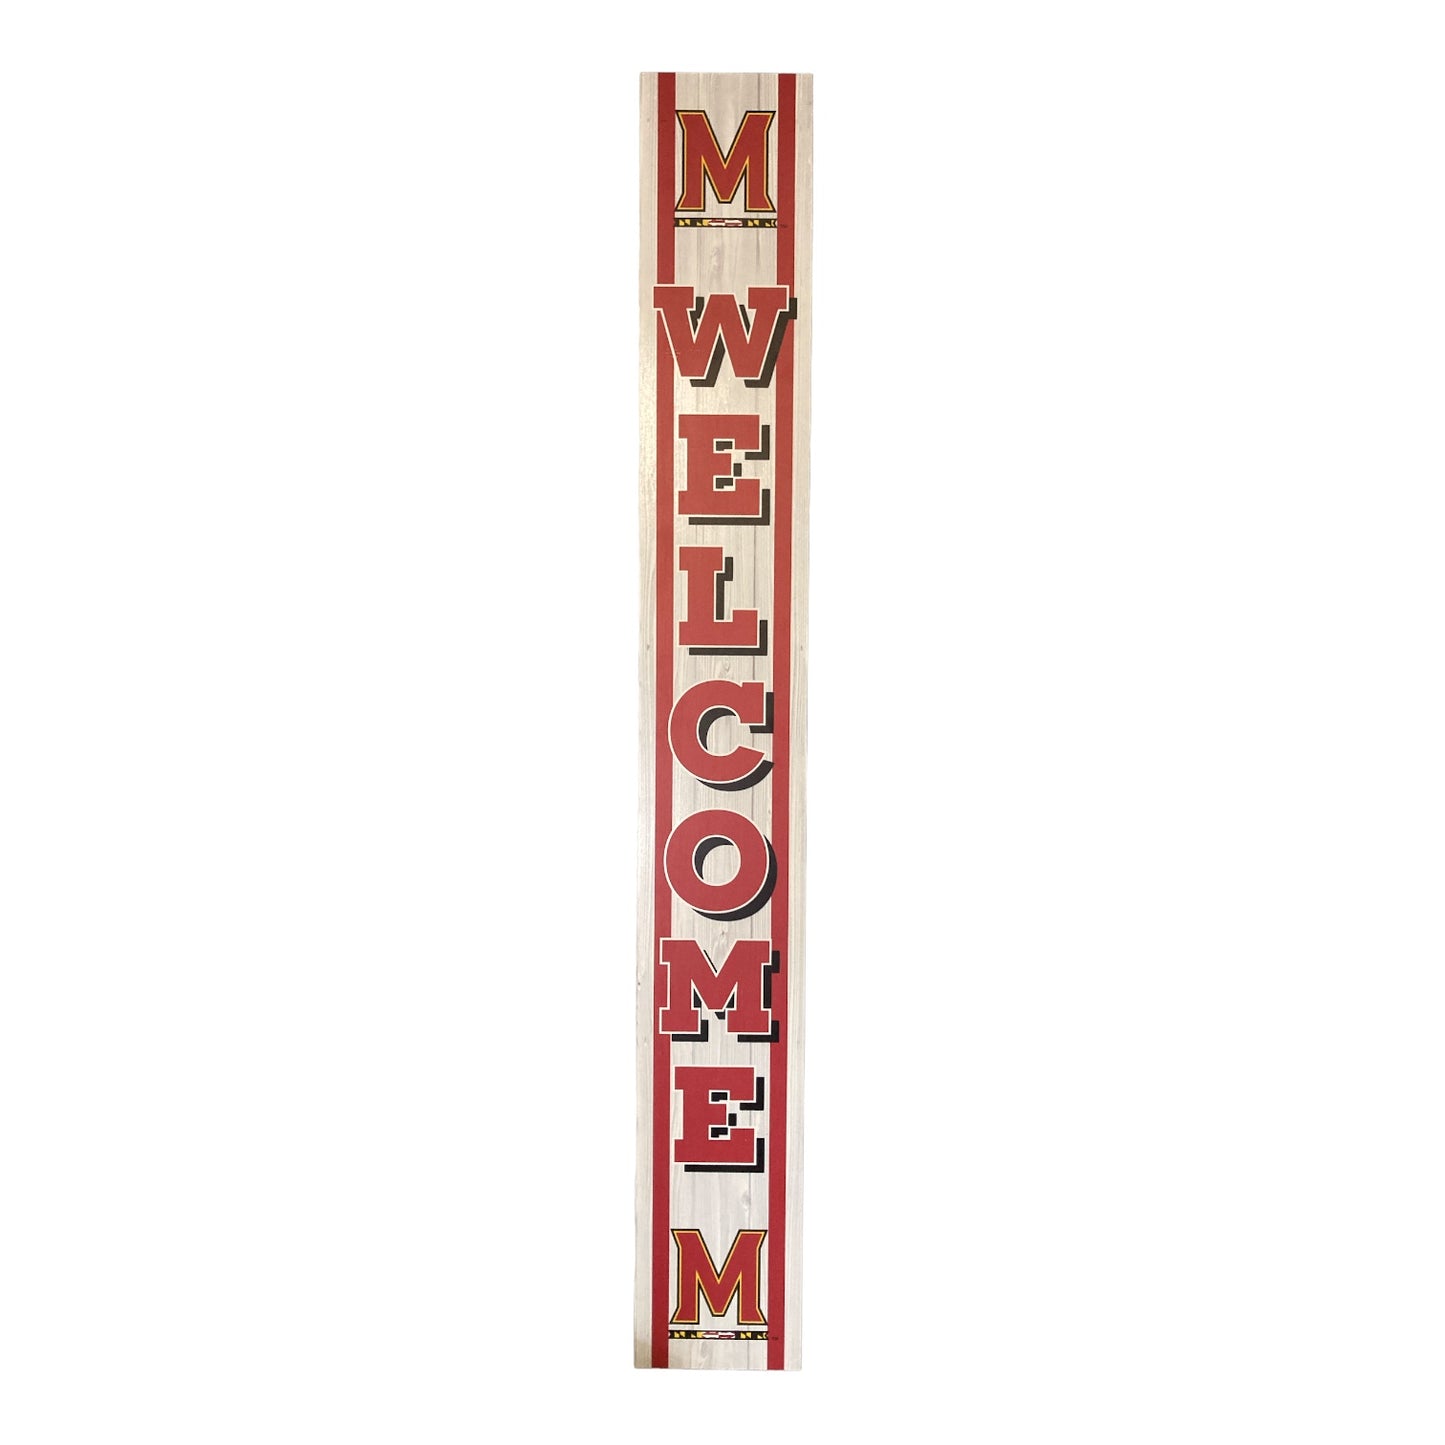 Official NCAA Licensed Weather Resistant Porch Greeter Sign, Maryland Terrapins